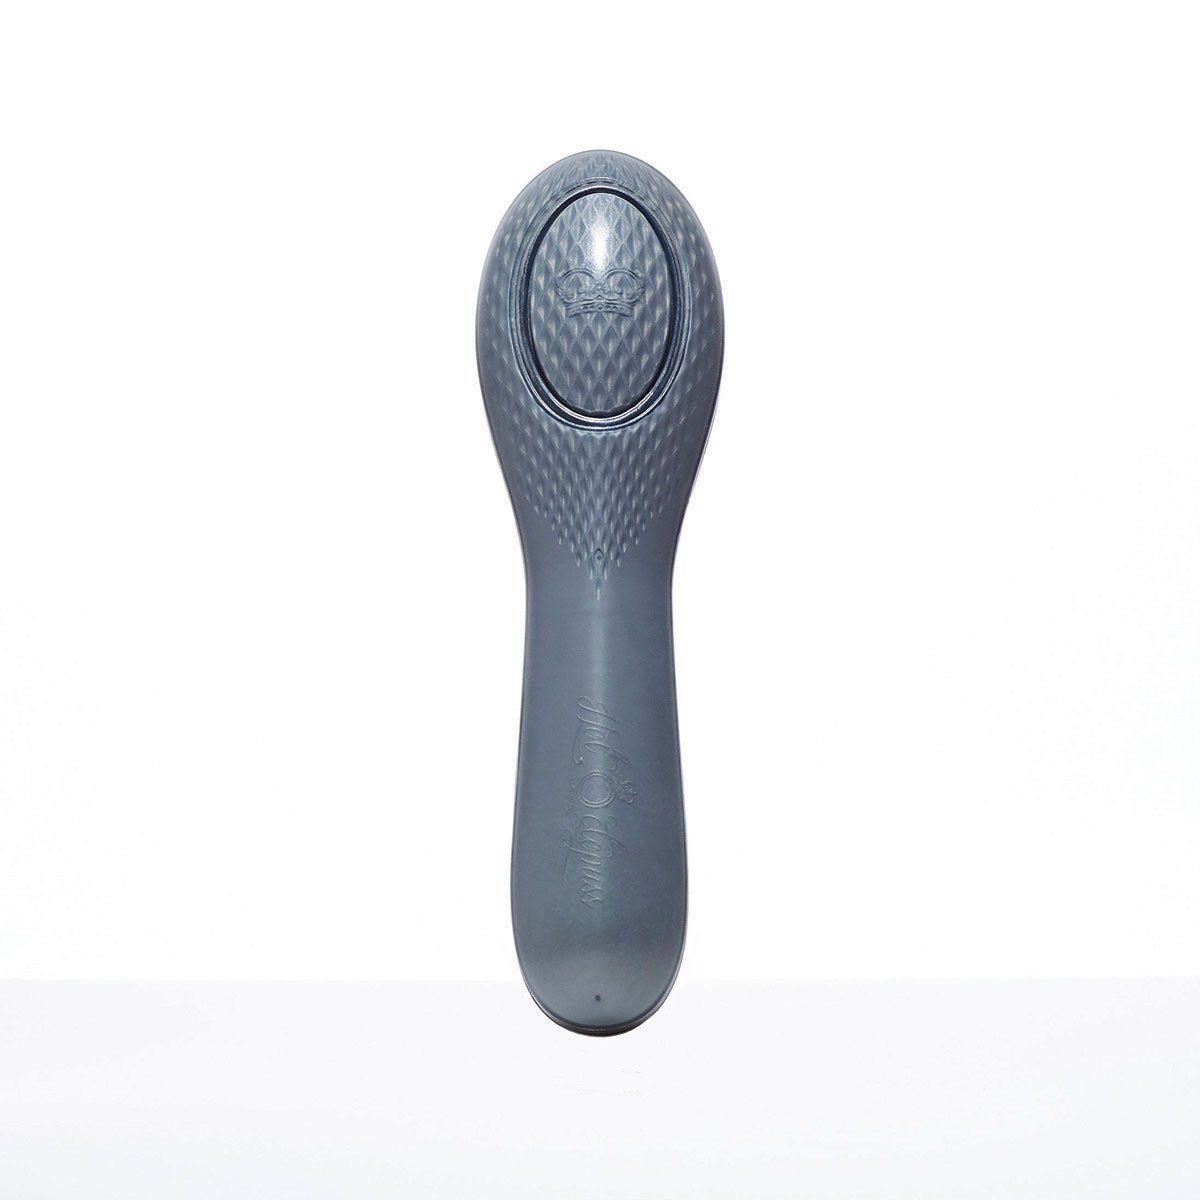 Queen Bee Oscillating Vibrating Clitoral Stimulator by Hot Octopuss - Hamilton Park Electronics